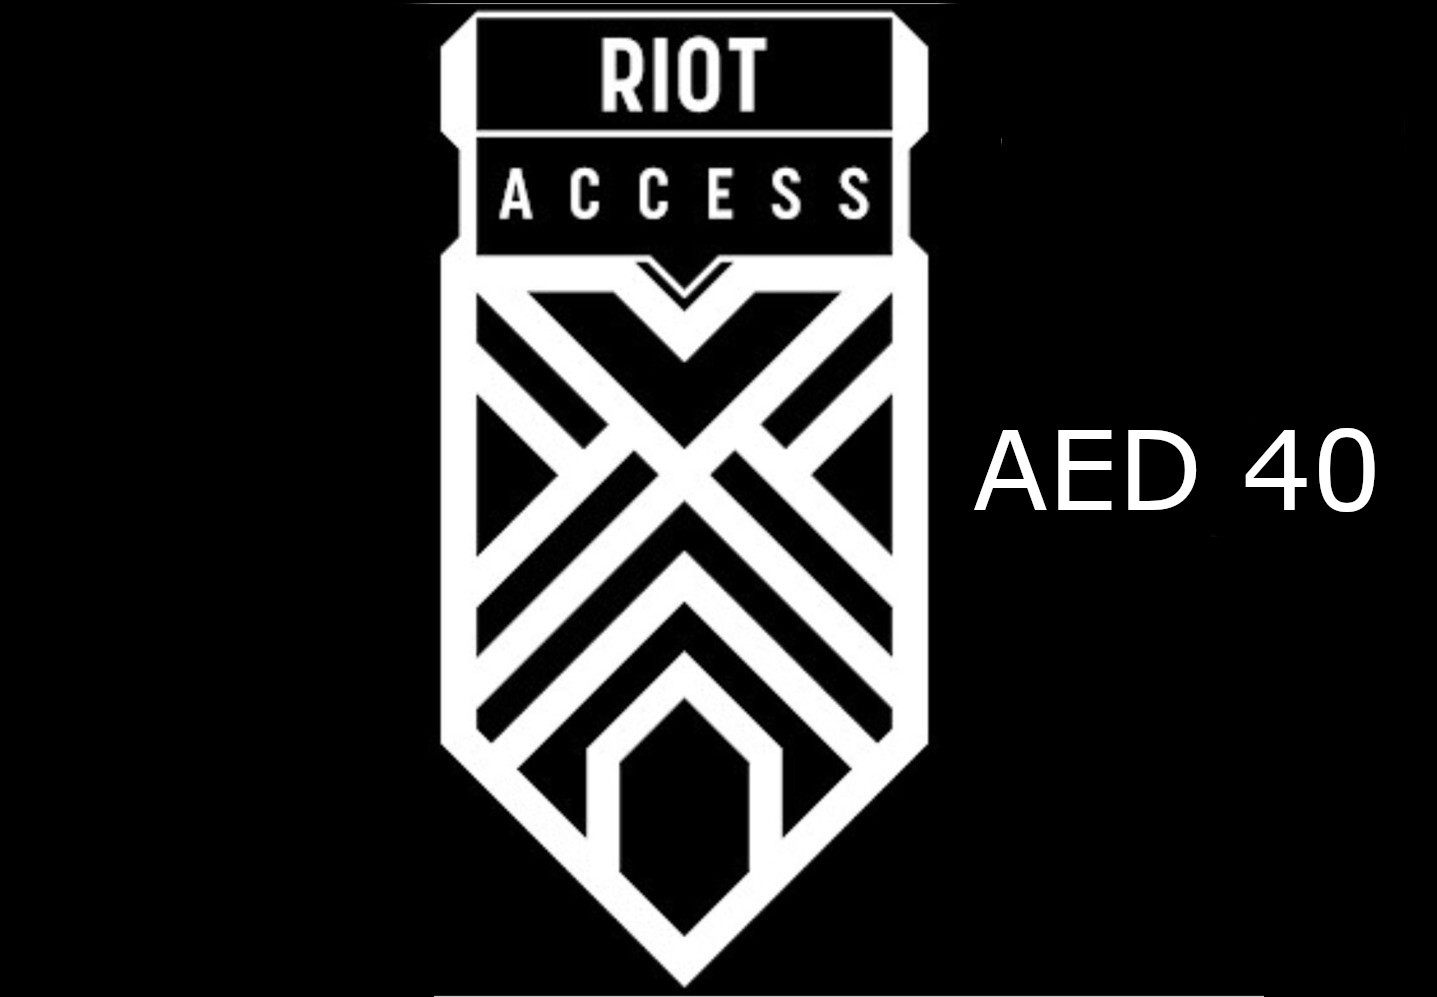 Riot Access 40 AED Code AE